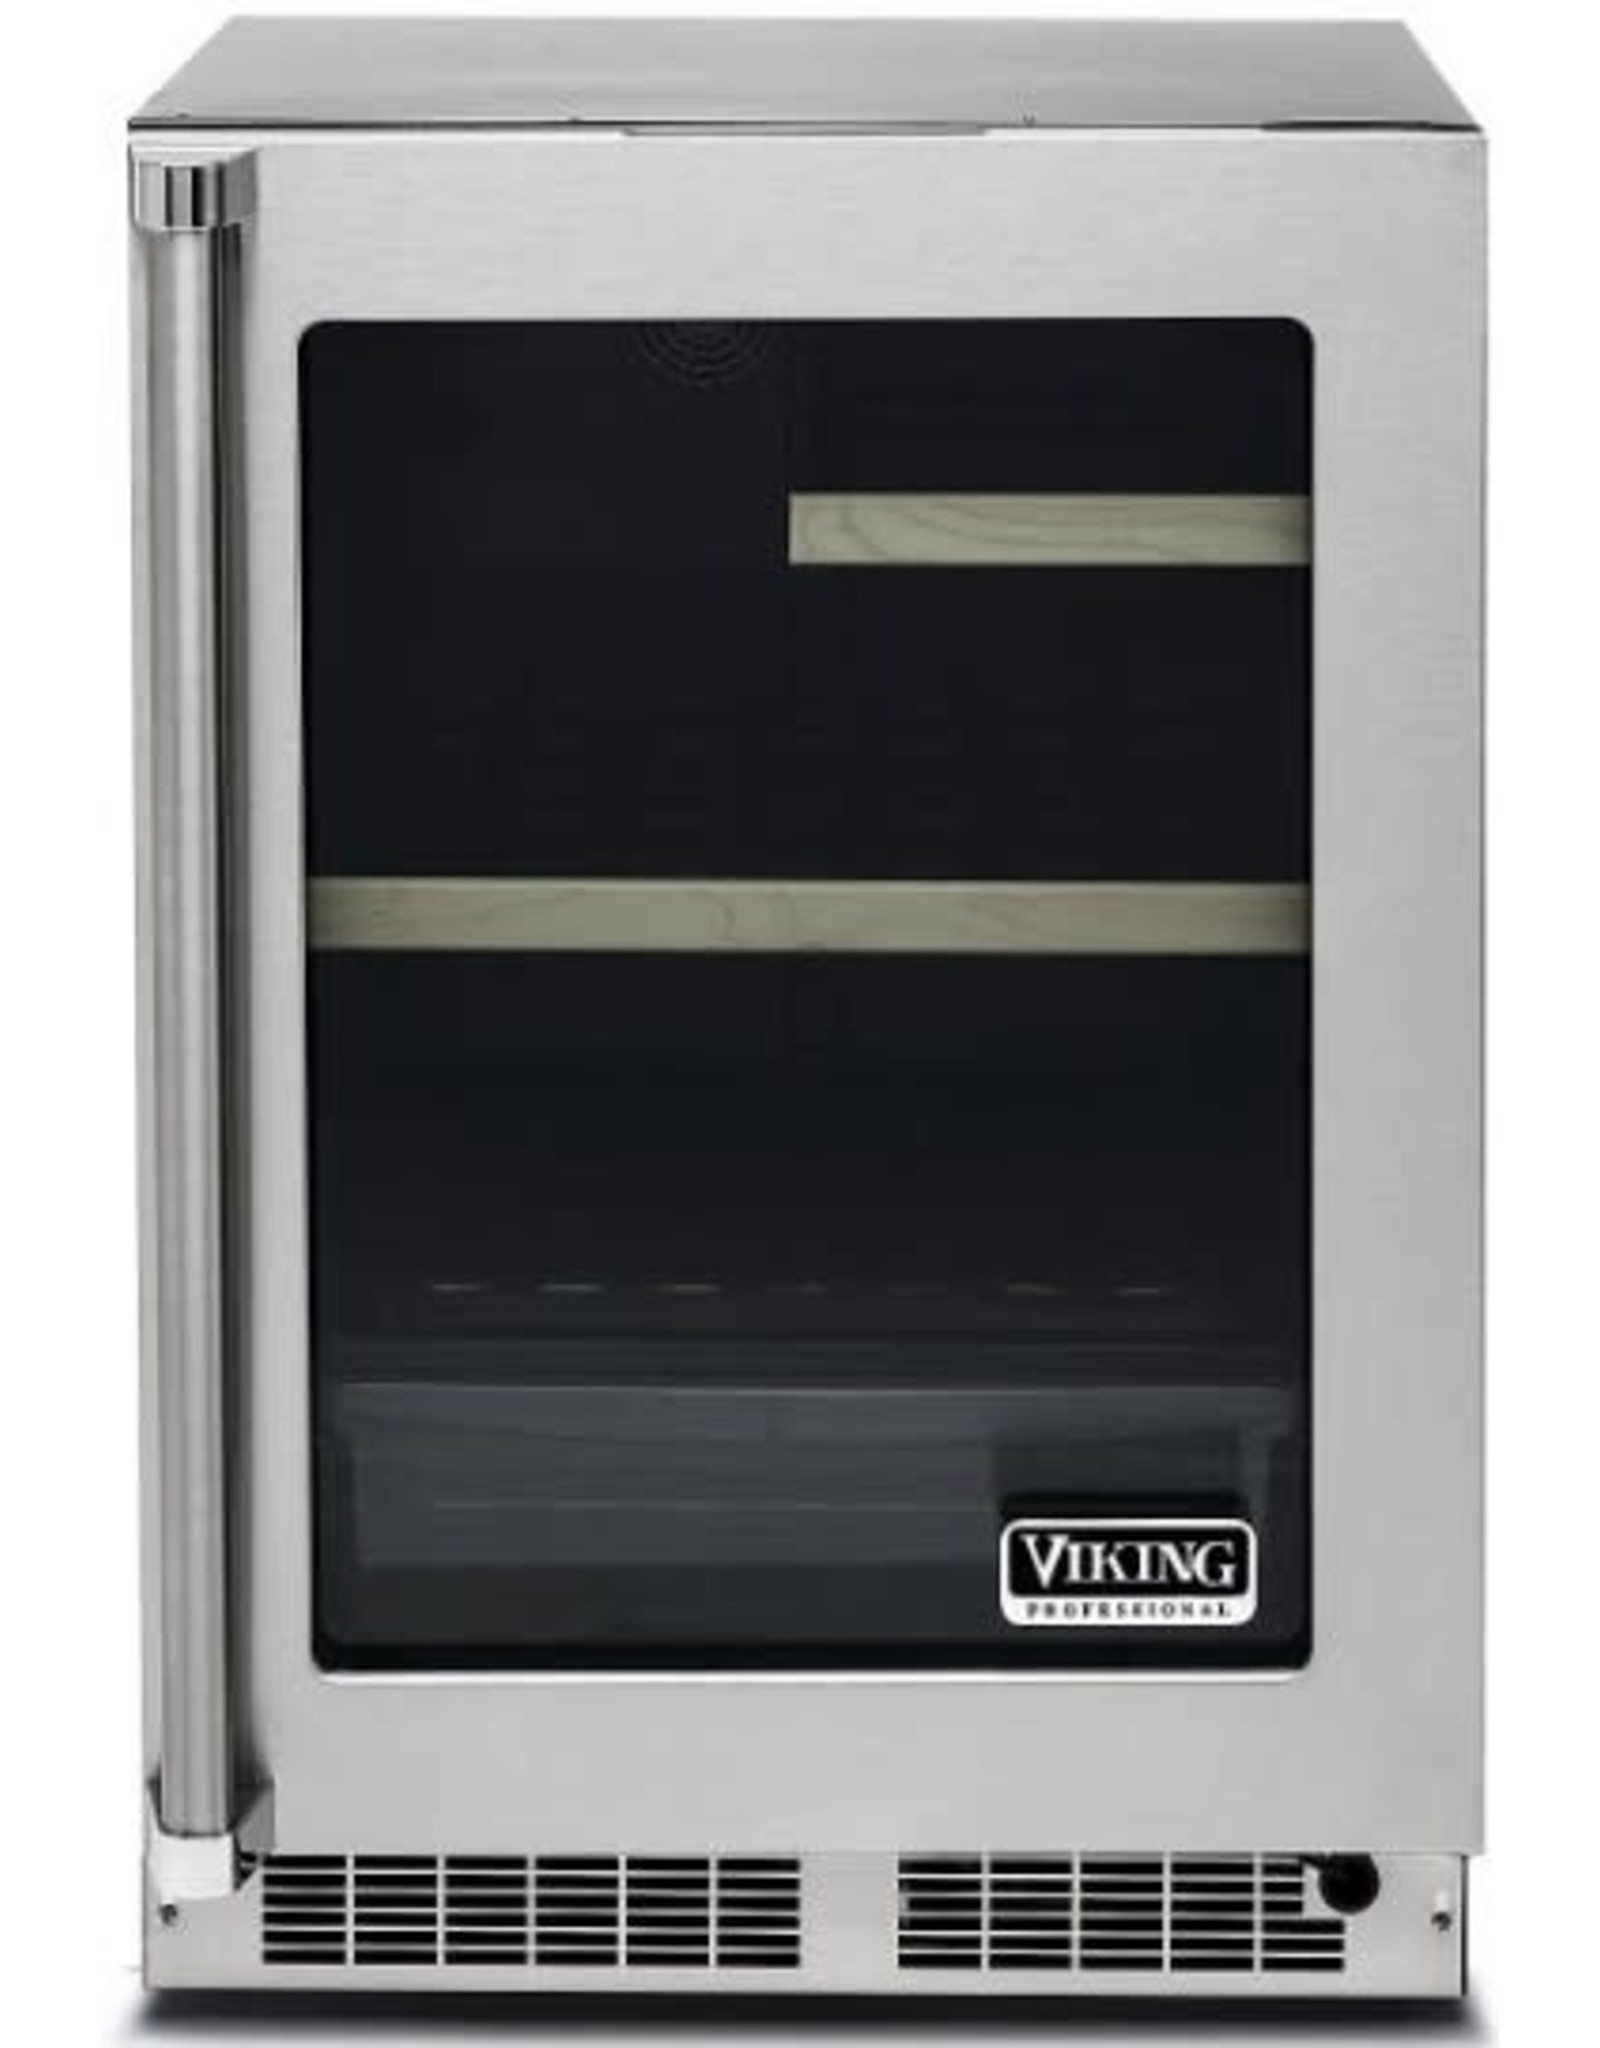 viking Ck.VRUI5240GRSS 24 Inch Undercounter Refrigerator with 20 Wine Bottle Capacity, Dynamic Cooling Technology, Slide-Out Convertible Shelf to Store Beverages, Food or Wine, Door Ajar Alarm, Integrated Controls, Sabbath Mode, and Star-K Certified: Right Hinge